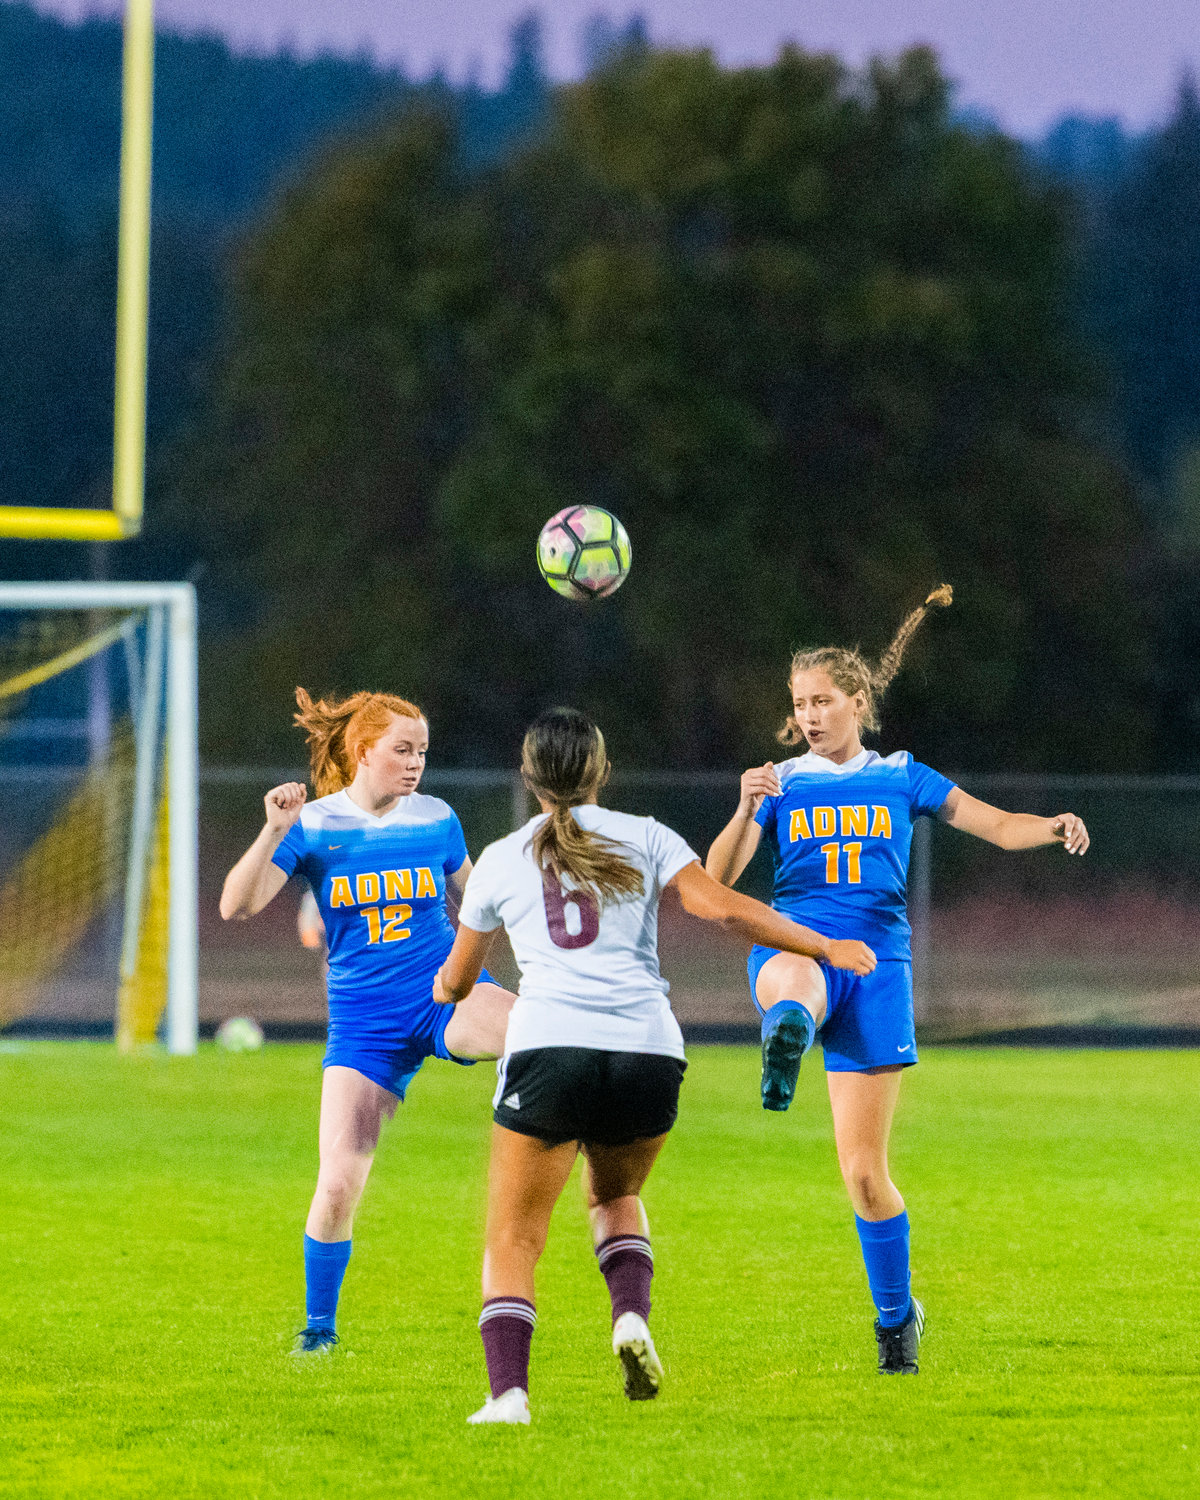 Adna’s Natalie Loose (12) and Bailey Naillon (11) control the ball Monday night at Pirate Stadium.